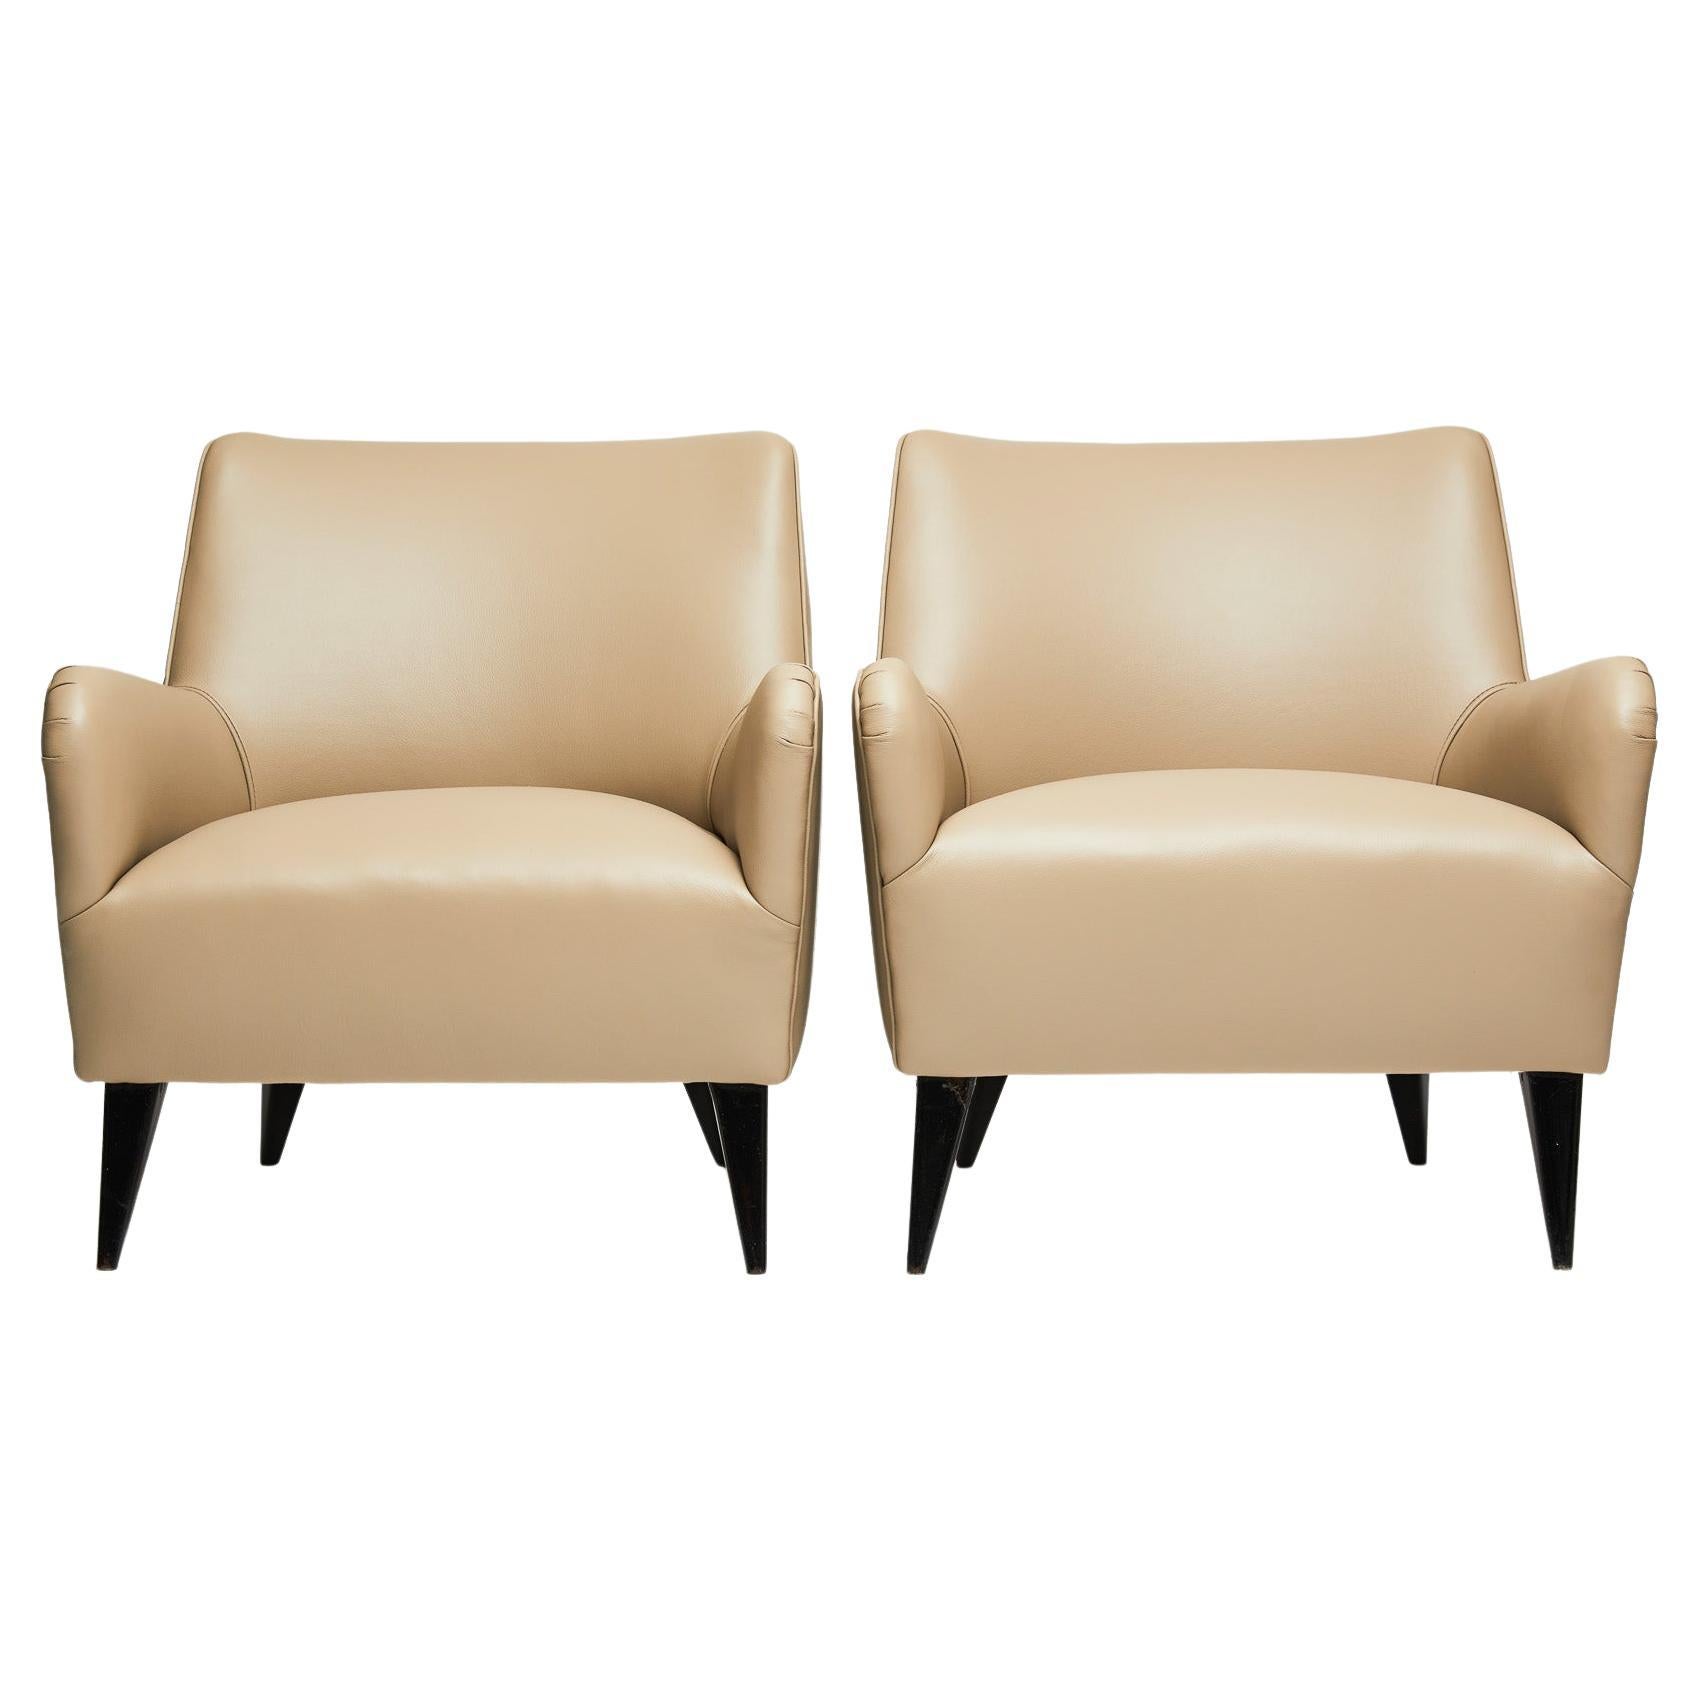 Available today, this Mid-Century Modern armchair set in beige leather & hardwood designed by Joaquim Tenreiro in 1955 is a showstopper. Full stop.

The stately pair consists of a hardwood structure with ebonized feet, spring seat and backrest in